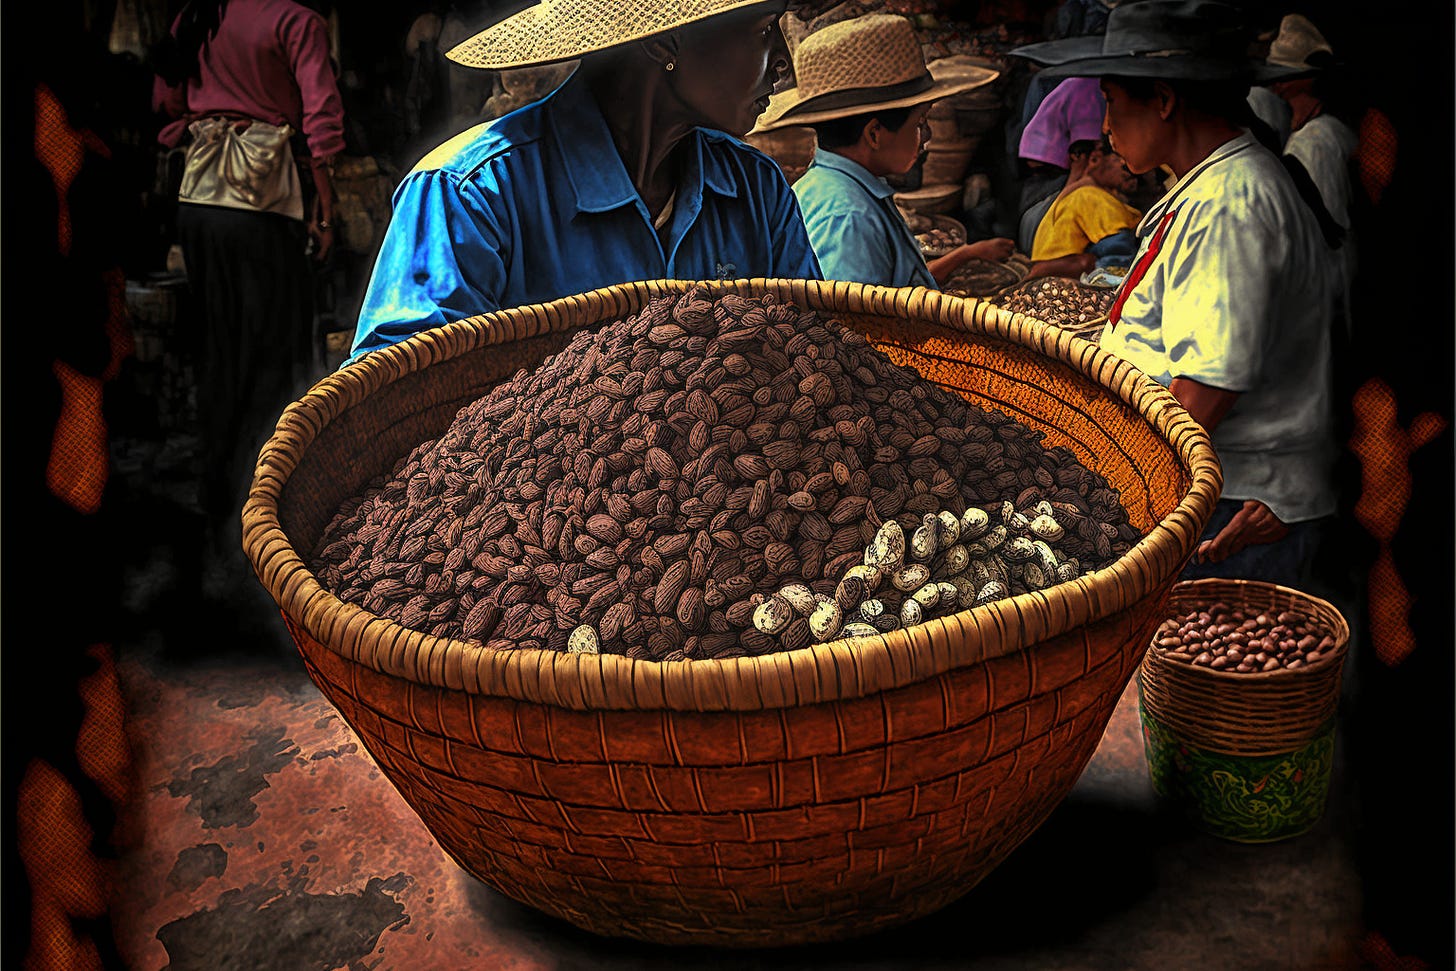 A basket full of dried cocoa beans being traded at a mayan market via the MidJourney AI bot.